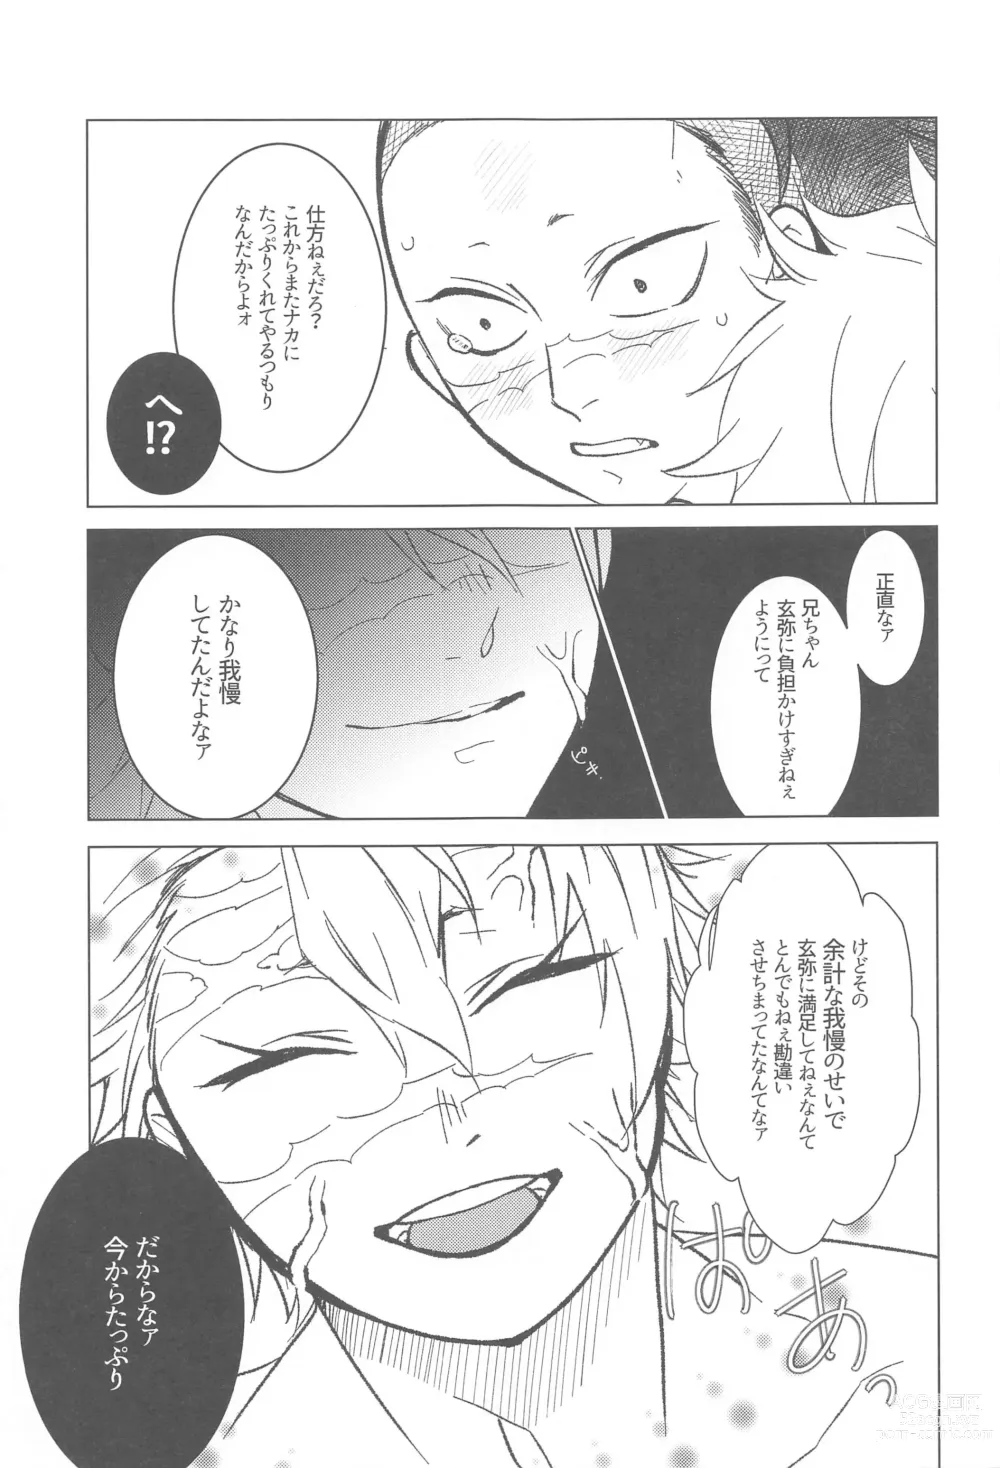 Page 8 of doujinshi love me again and again